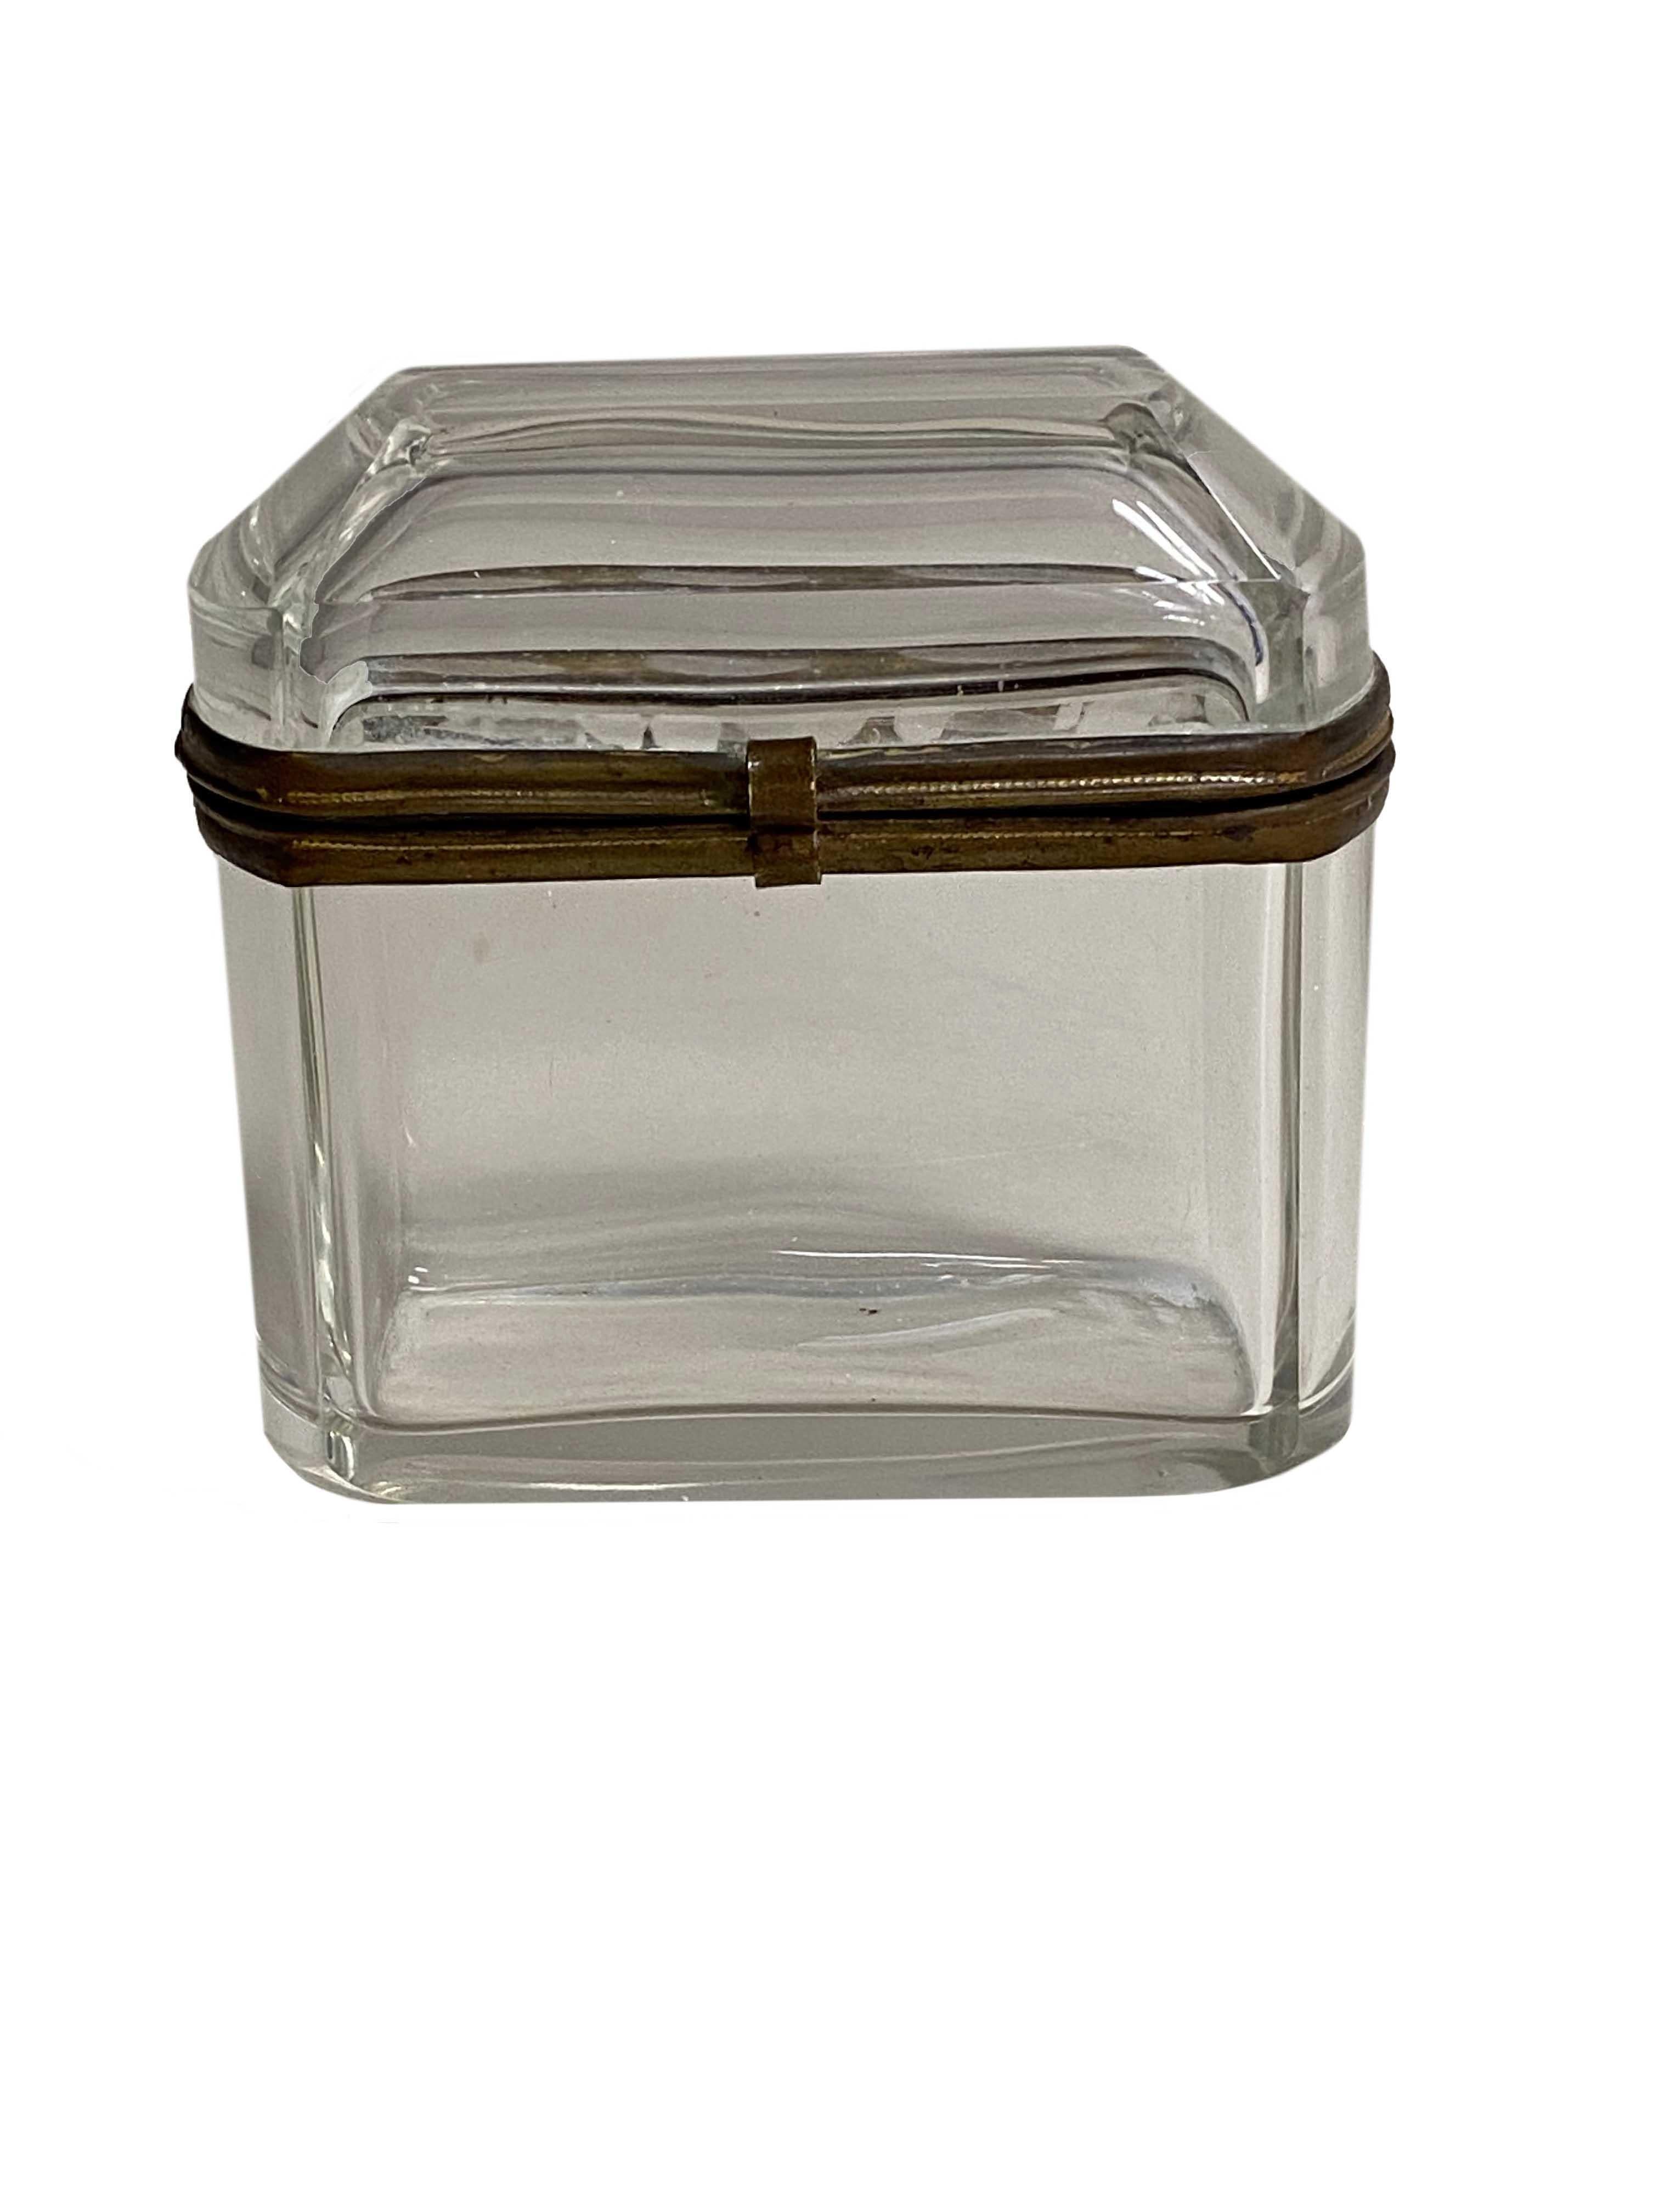 19th Century French Beveled Glass Box For Sale 1